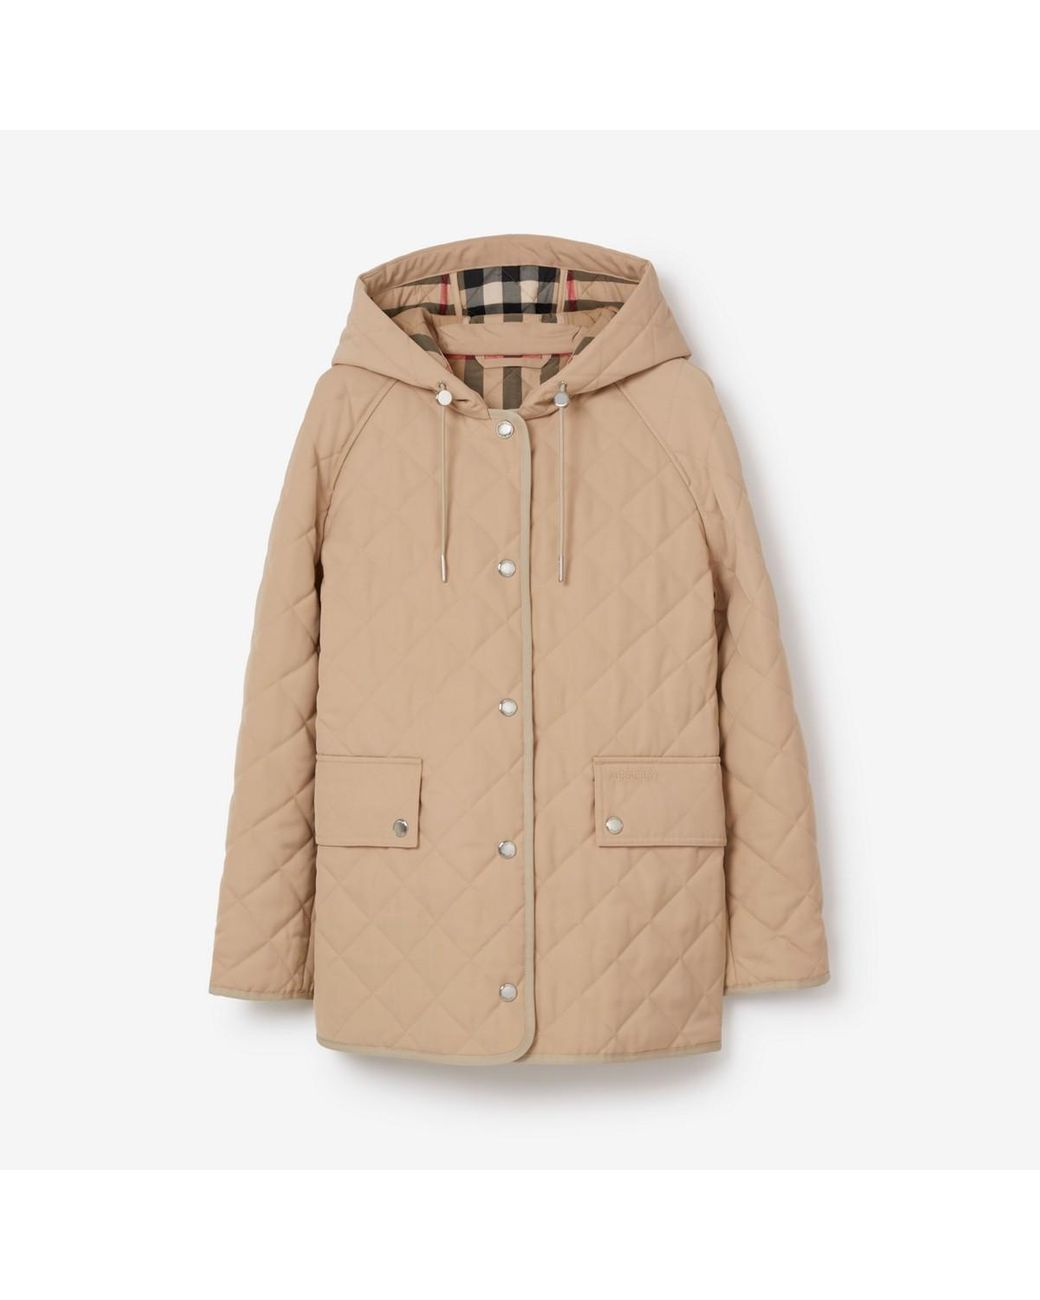 Burberry Logo Detail Diamond Quilted Hooded Jacket in Natural | Lyst